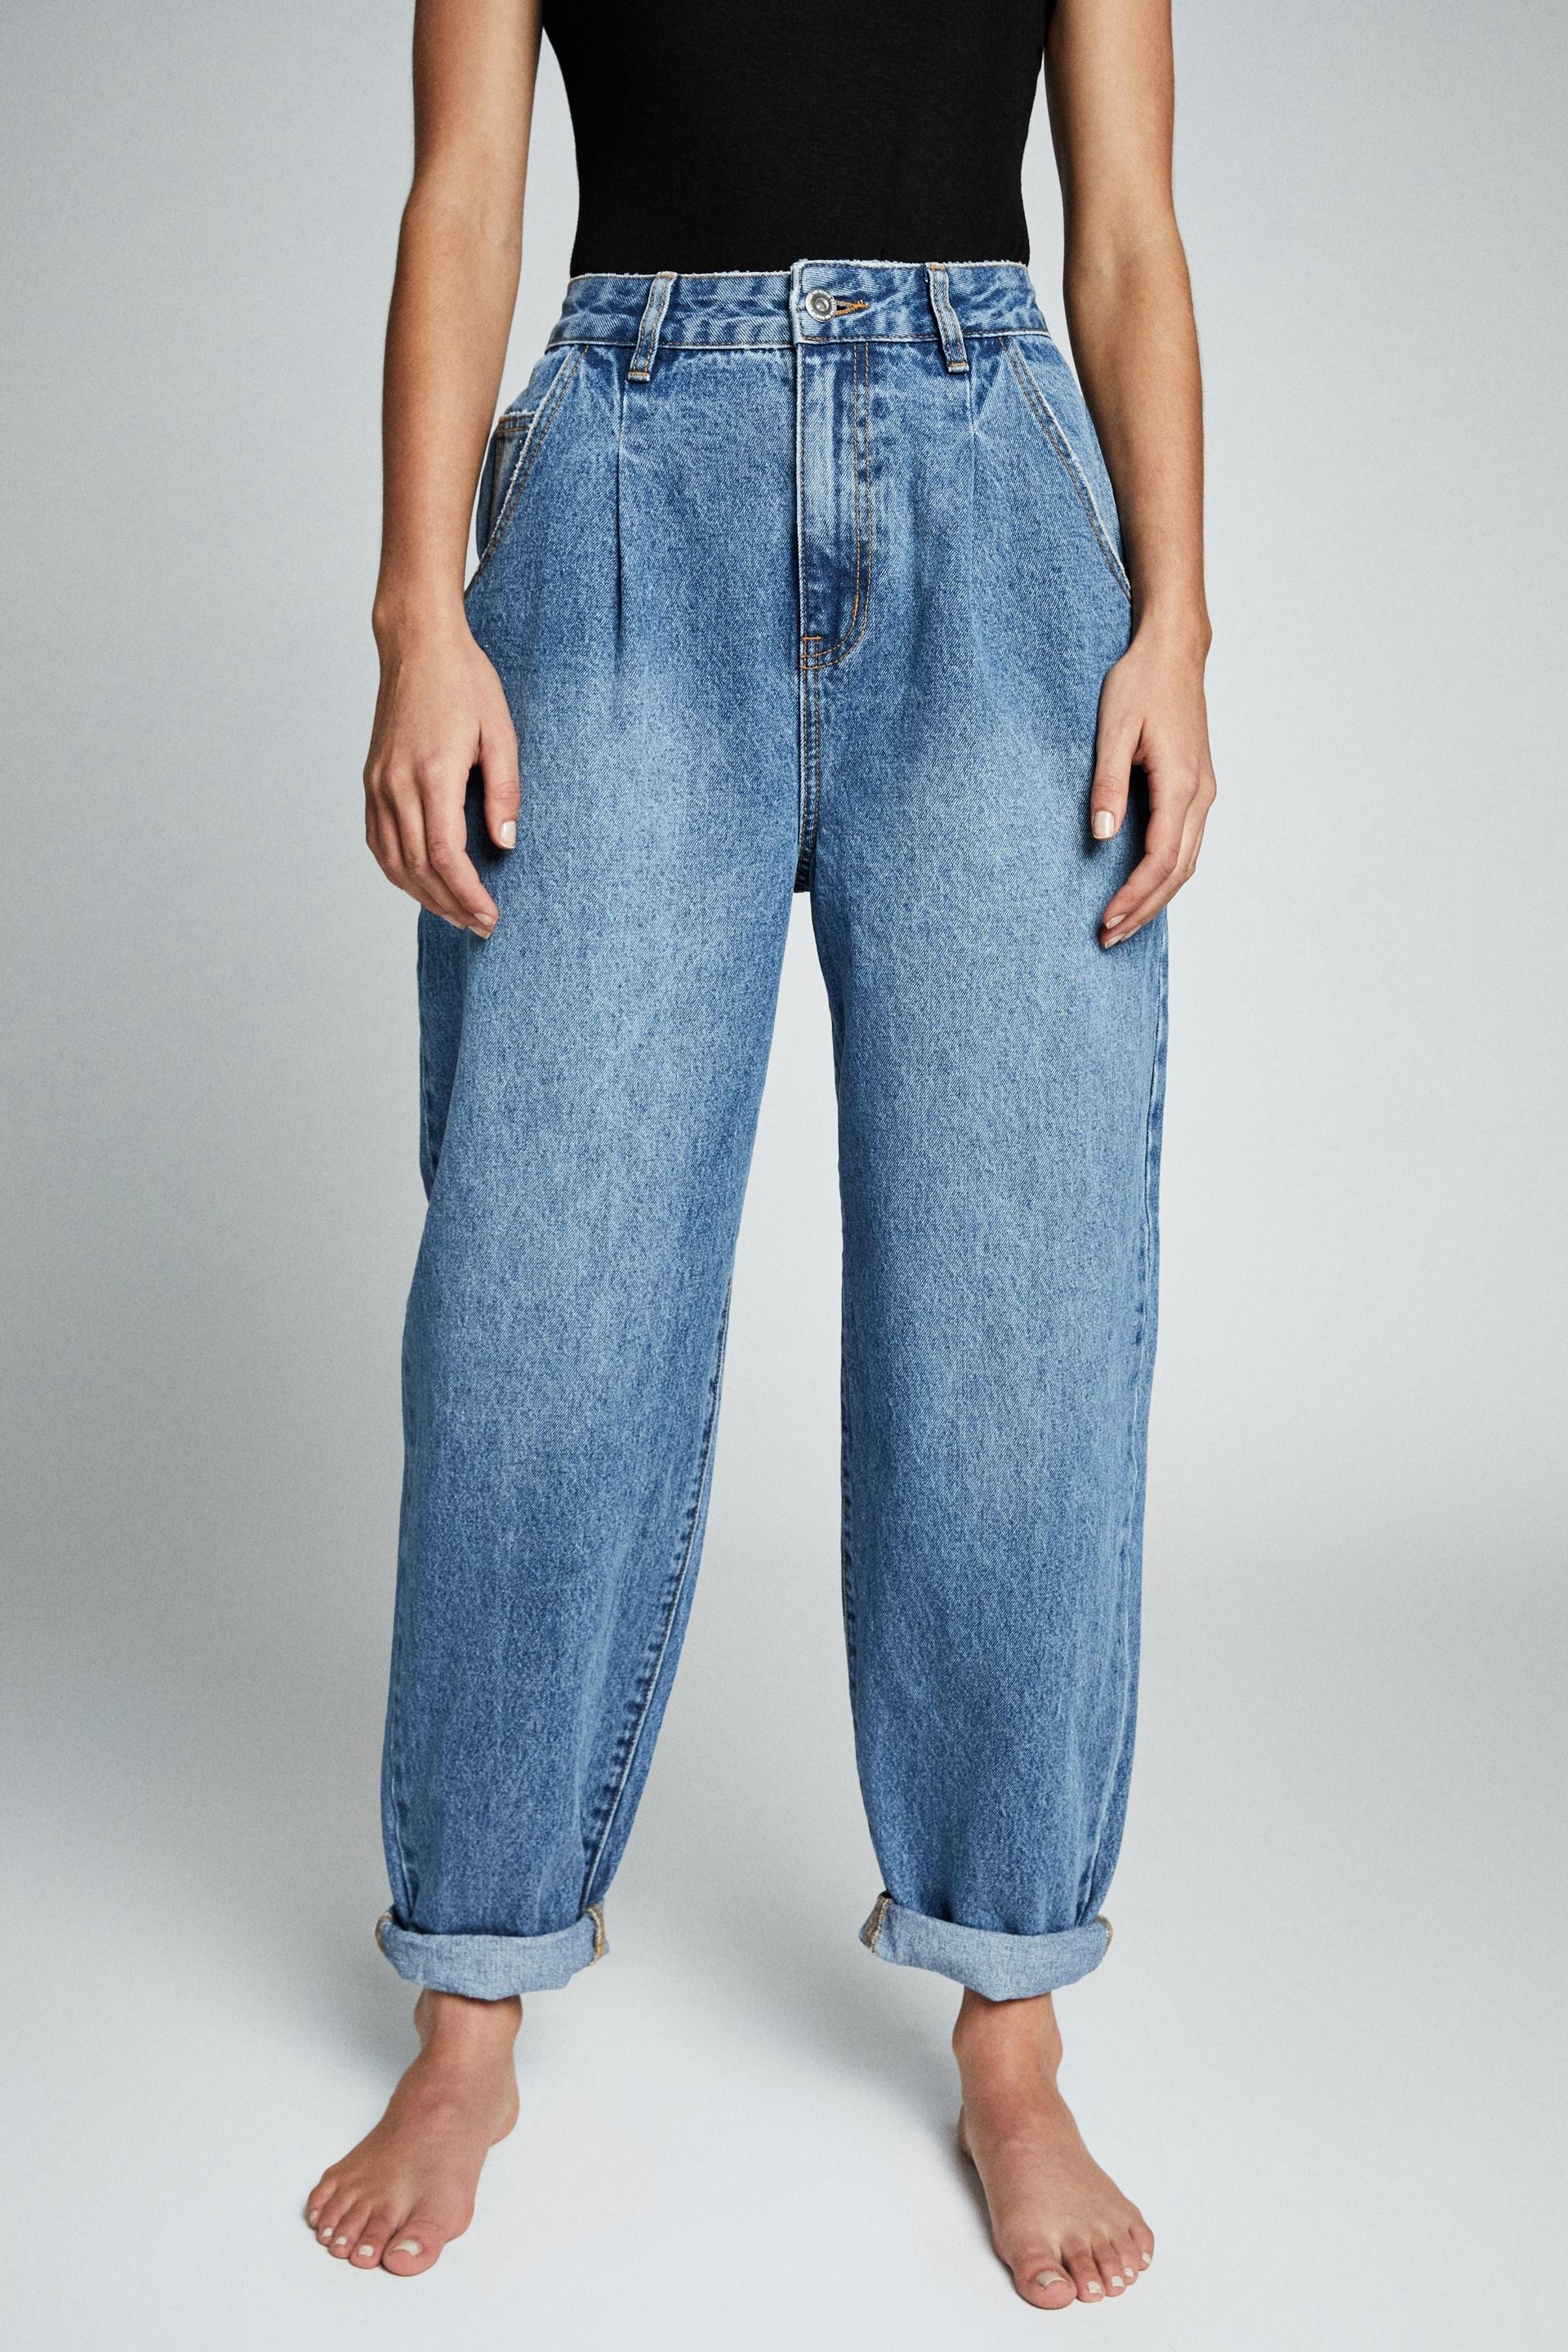 Slouch jean - bronte blue Cotton On Jeans | Superbalist.com